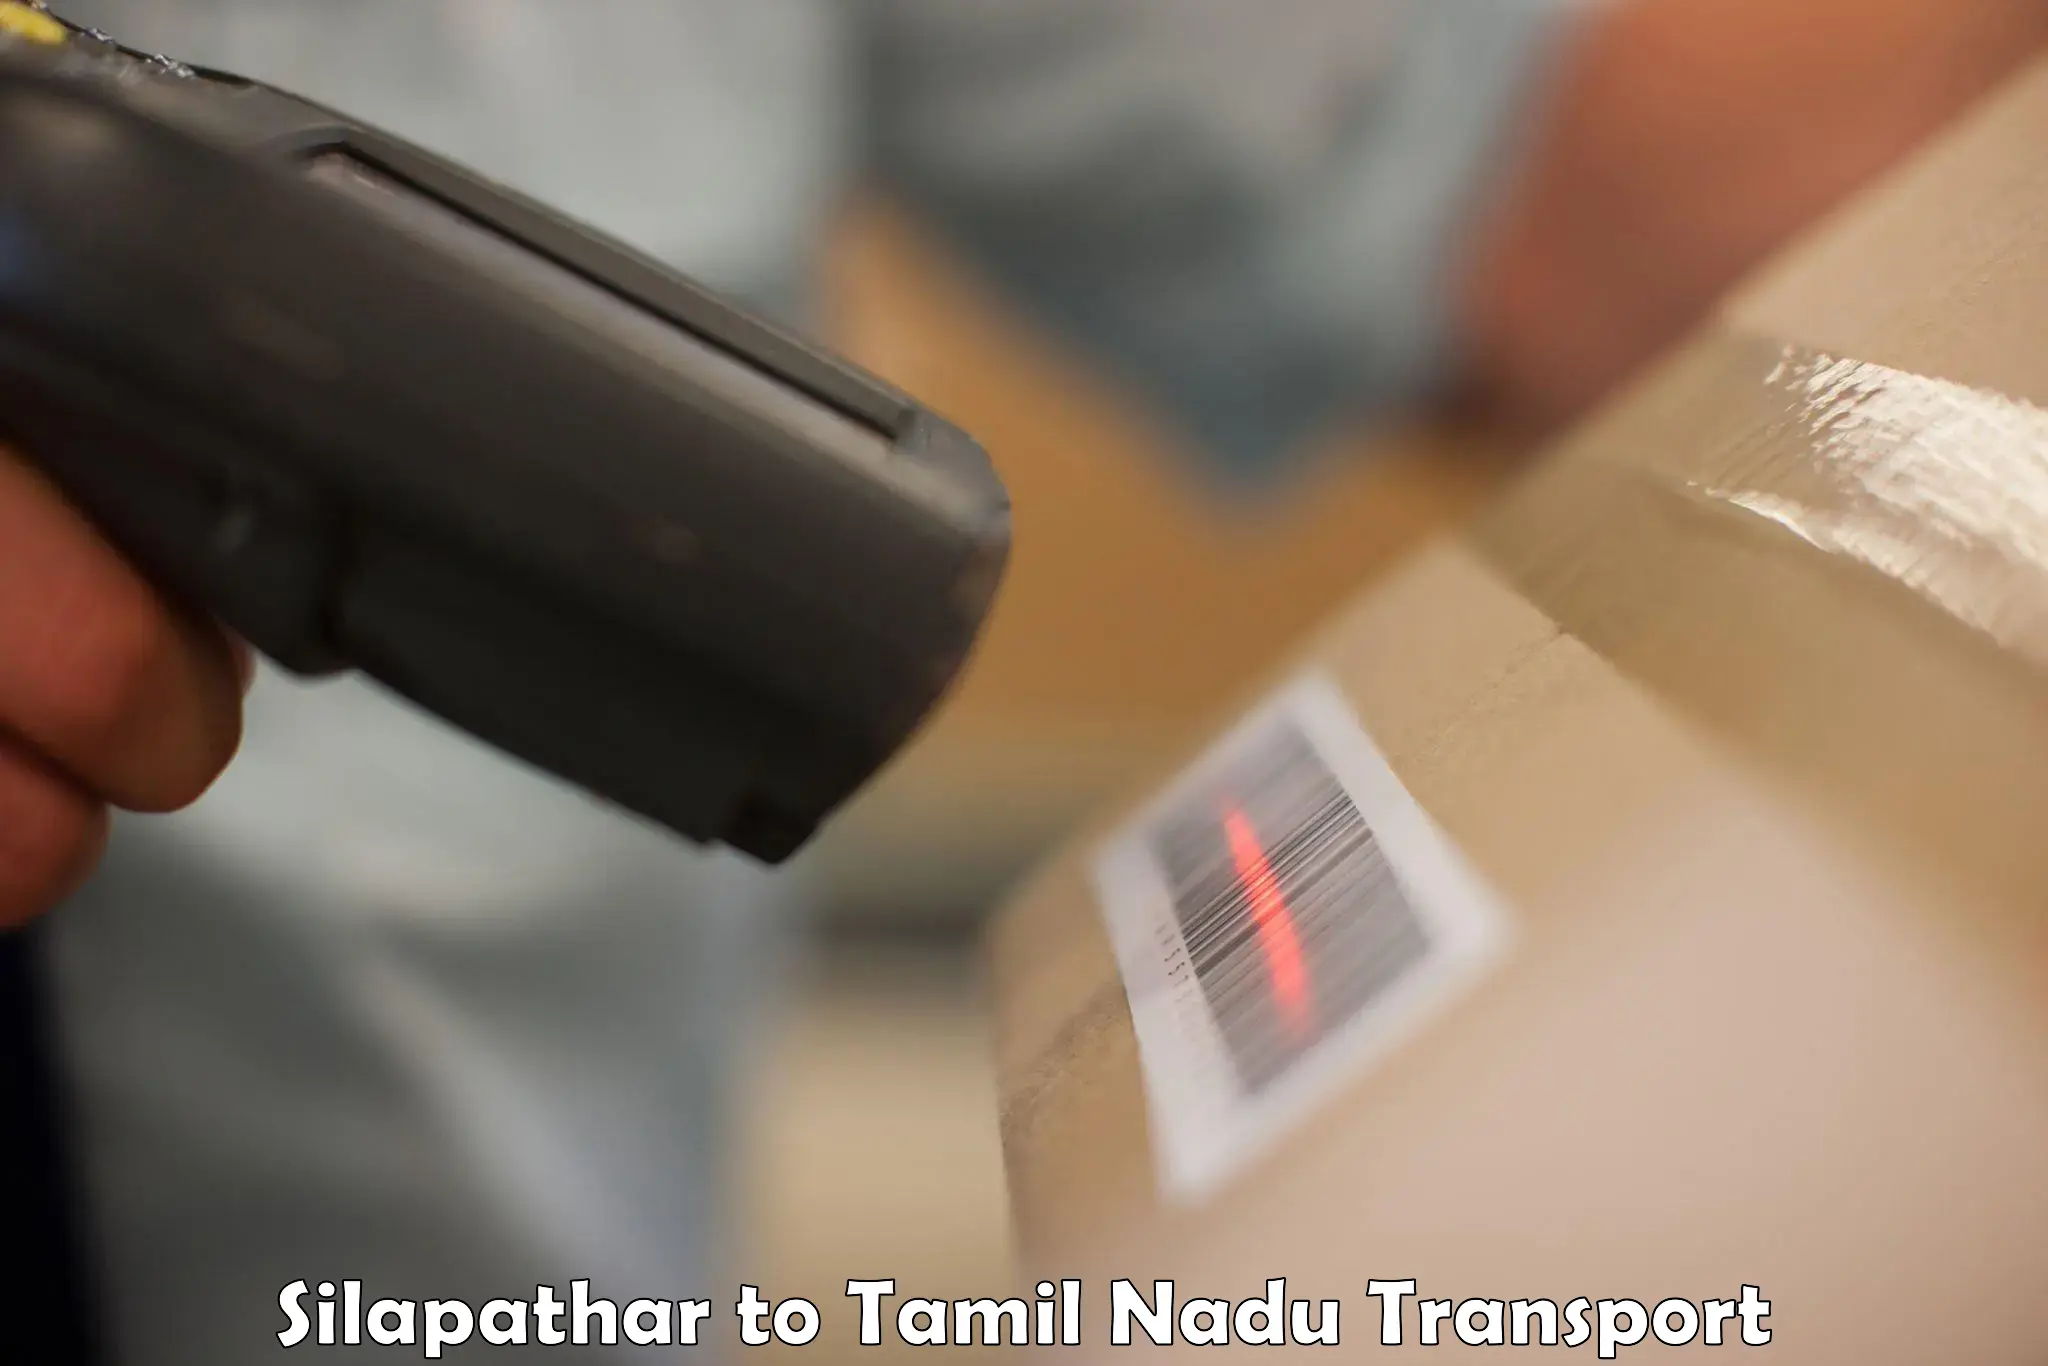 Nationwide transport services Silapathar to Vandavasi